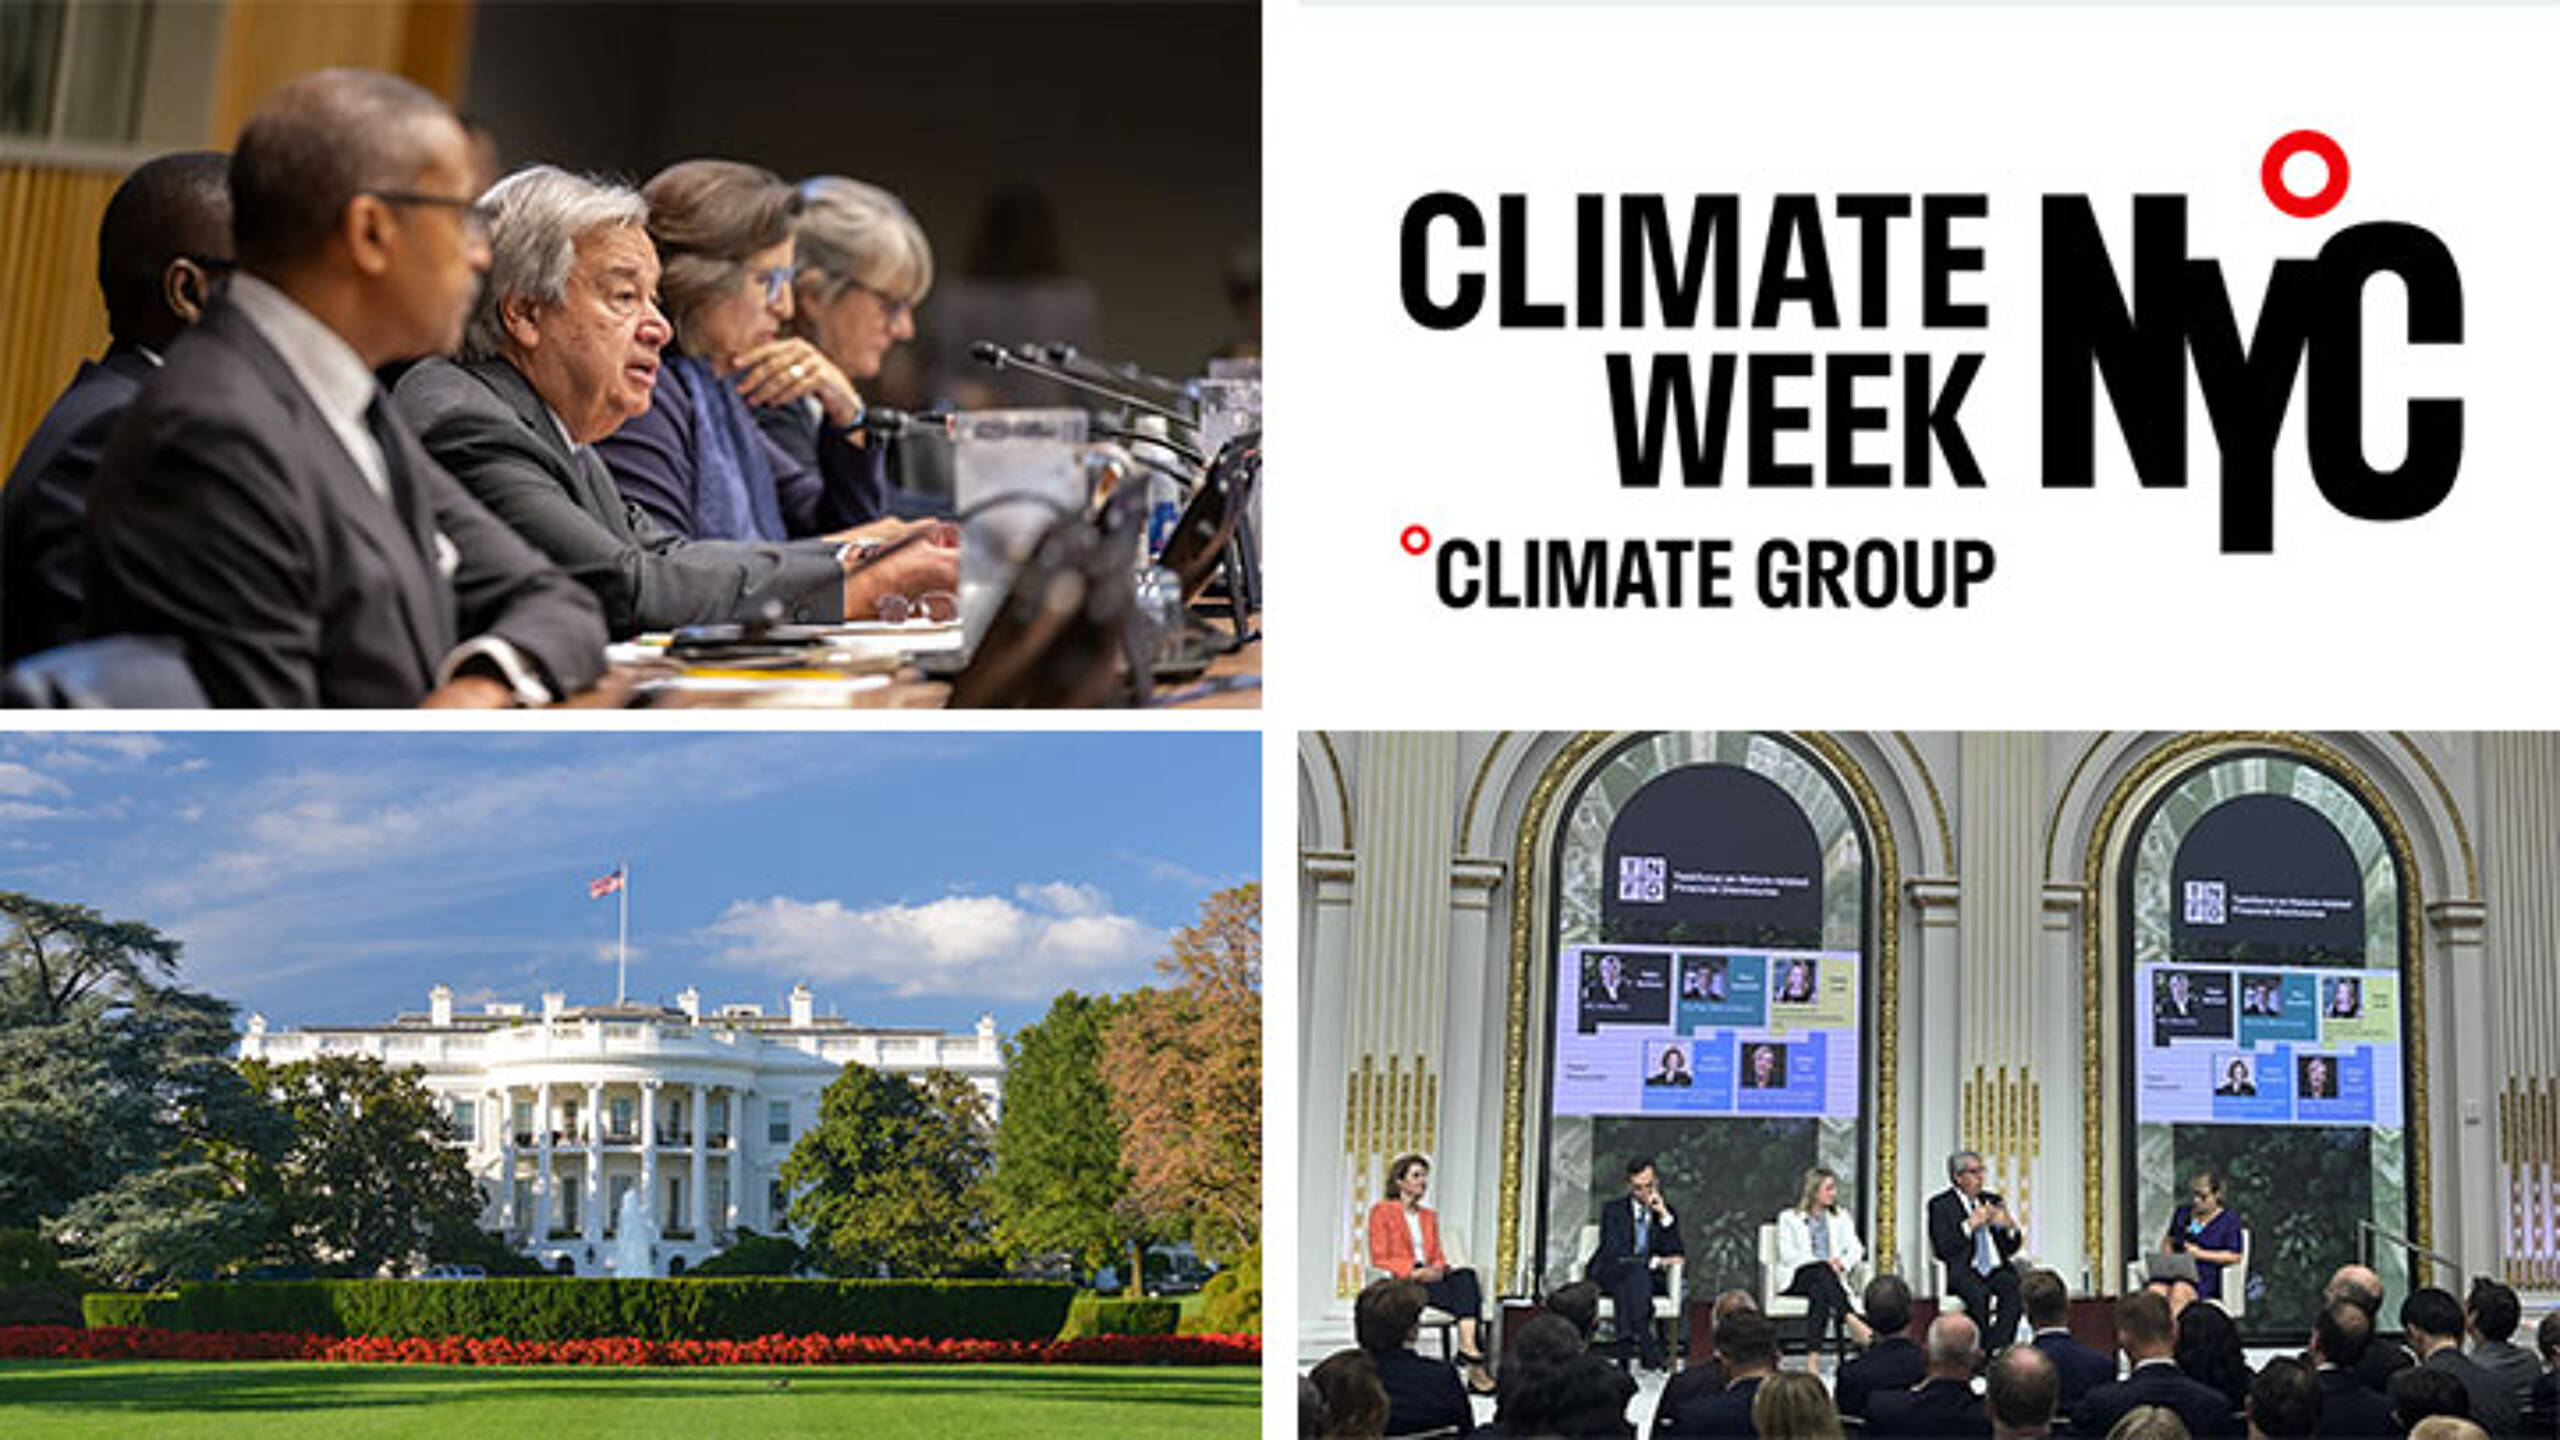 From green jobs for youth to just transition funding: The 11 biggest announcements from Climate Week NYC and the UNGA